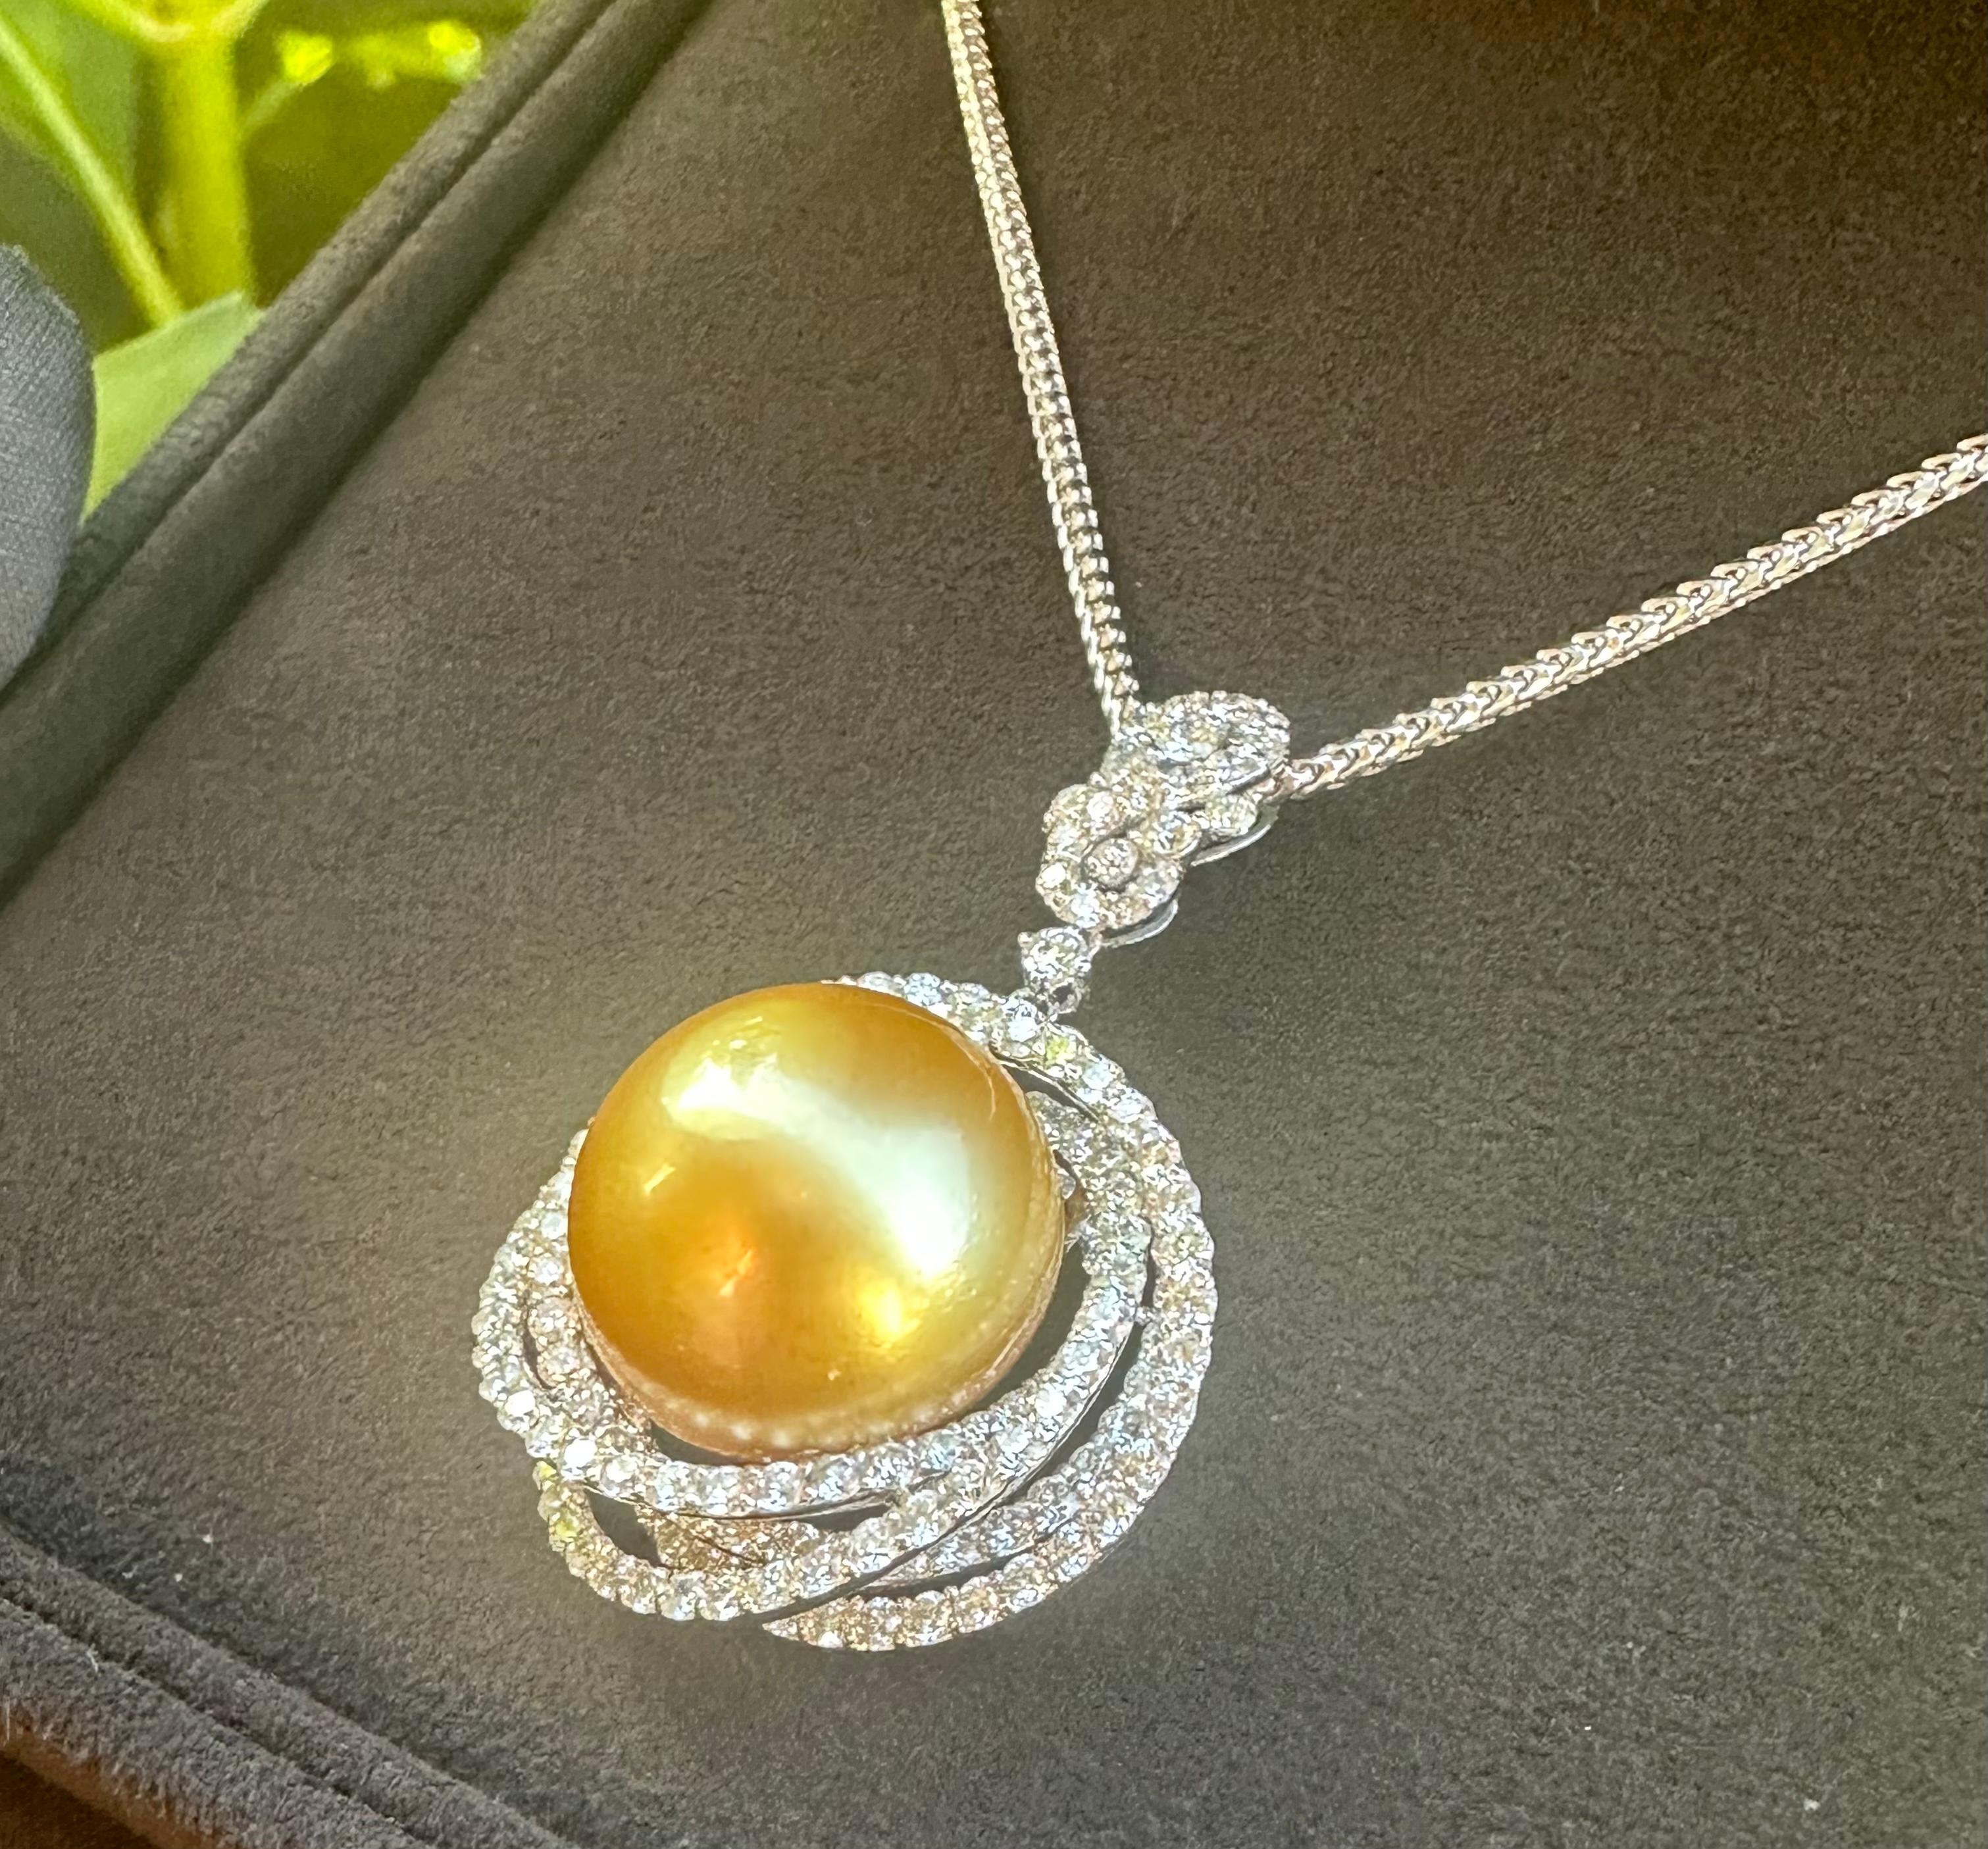 Round Cut Huge 16.75 MM Golden South Sea Pearl 6.19 Carat Diamond 18k White Gold Necklace